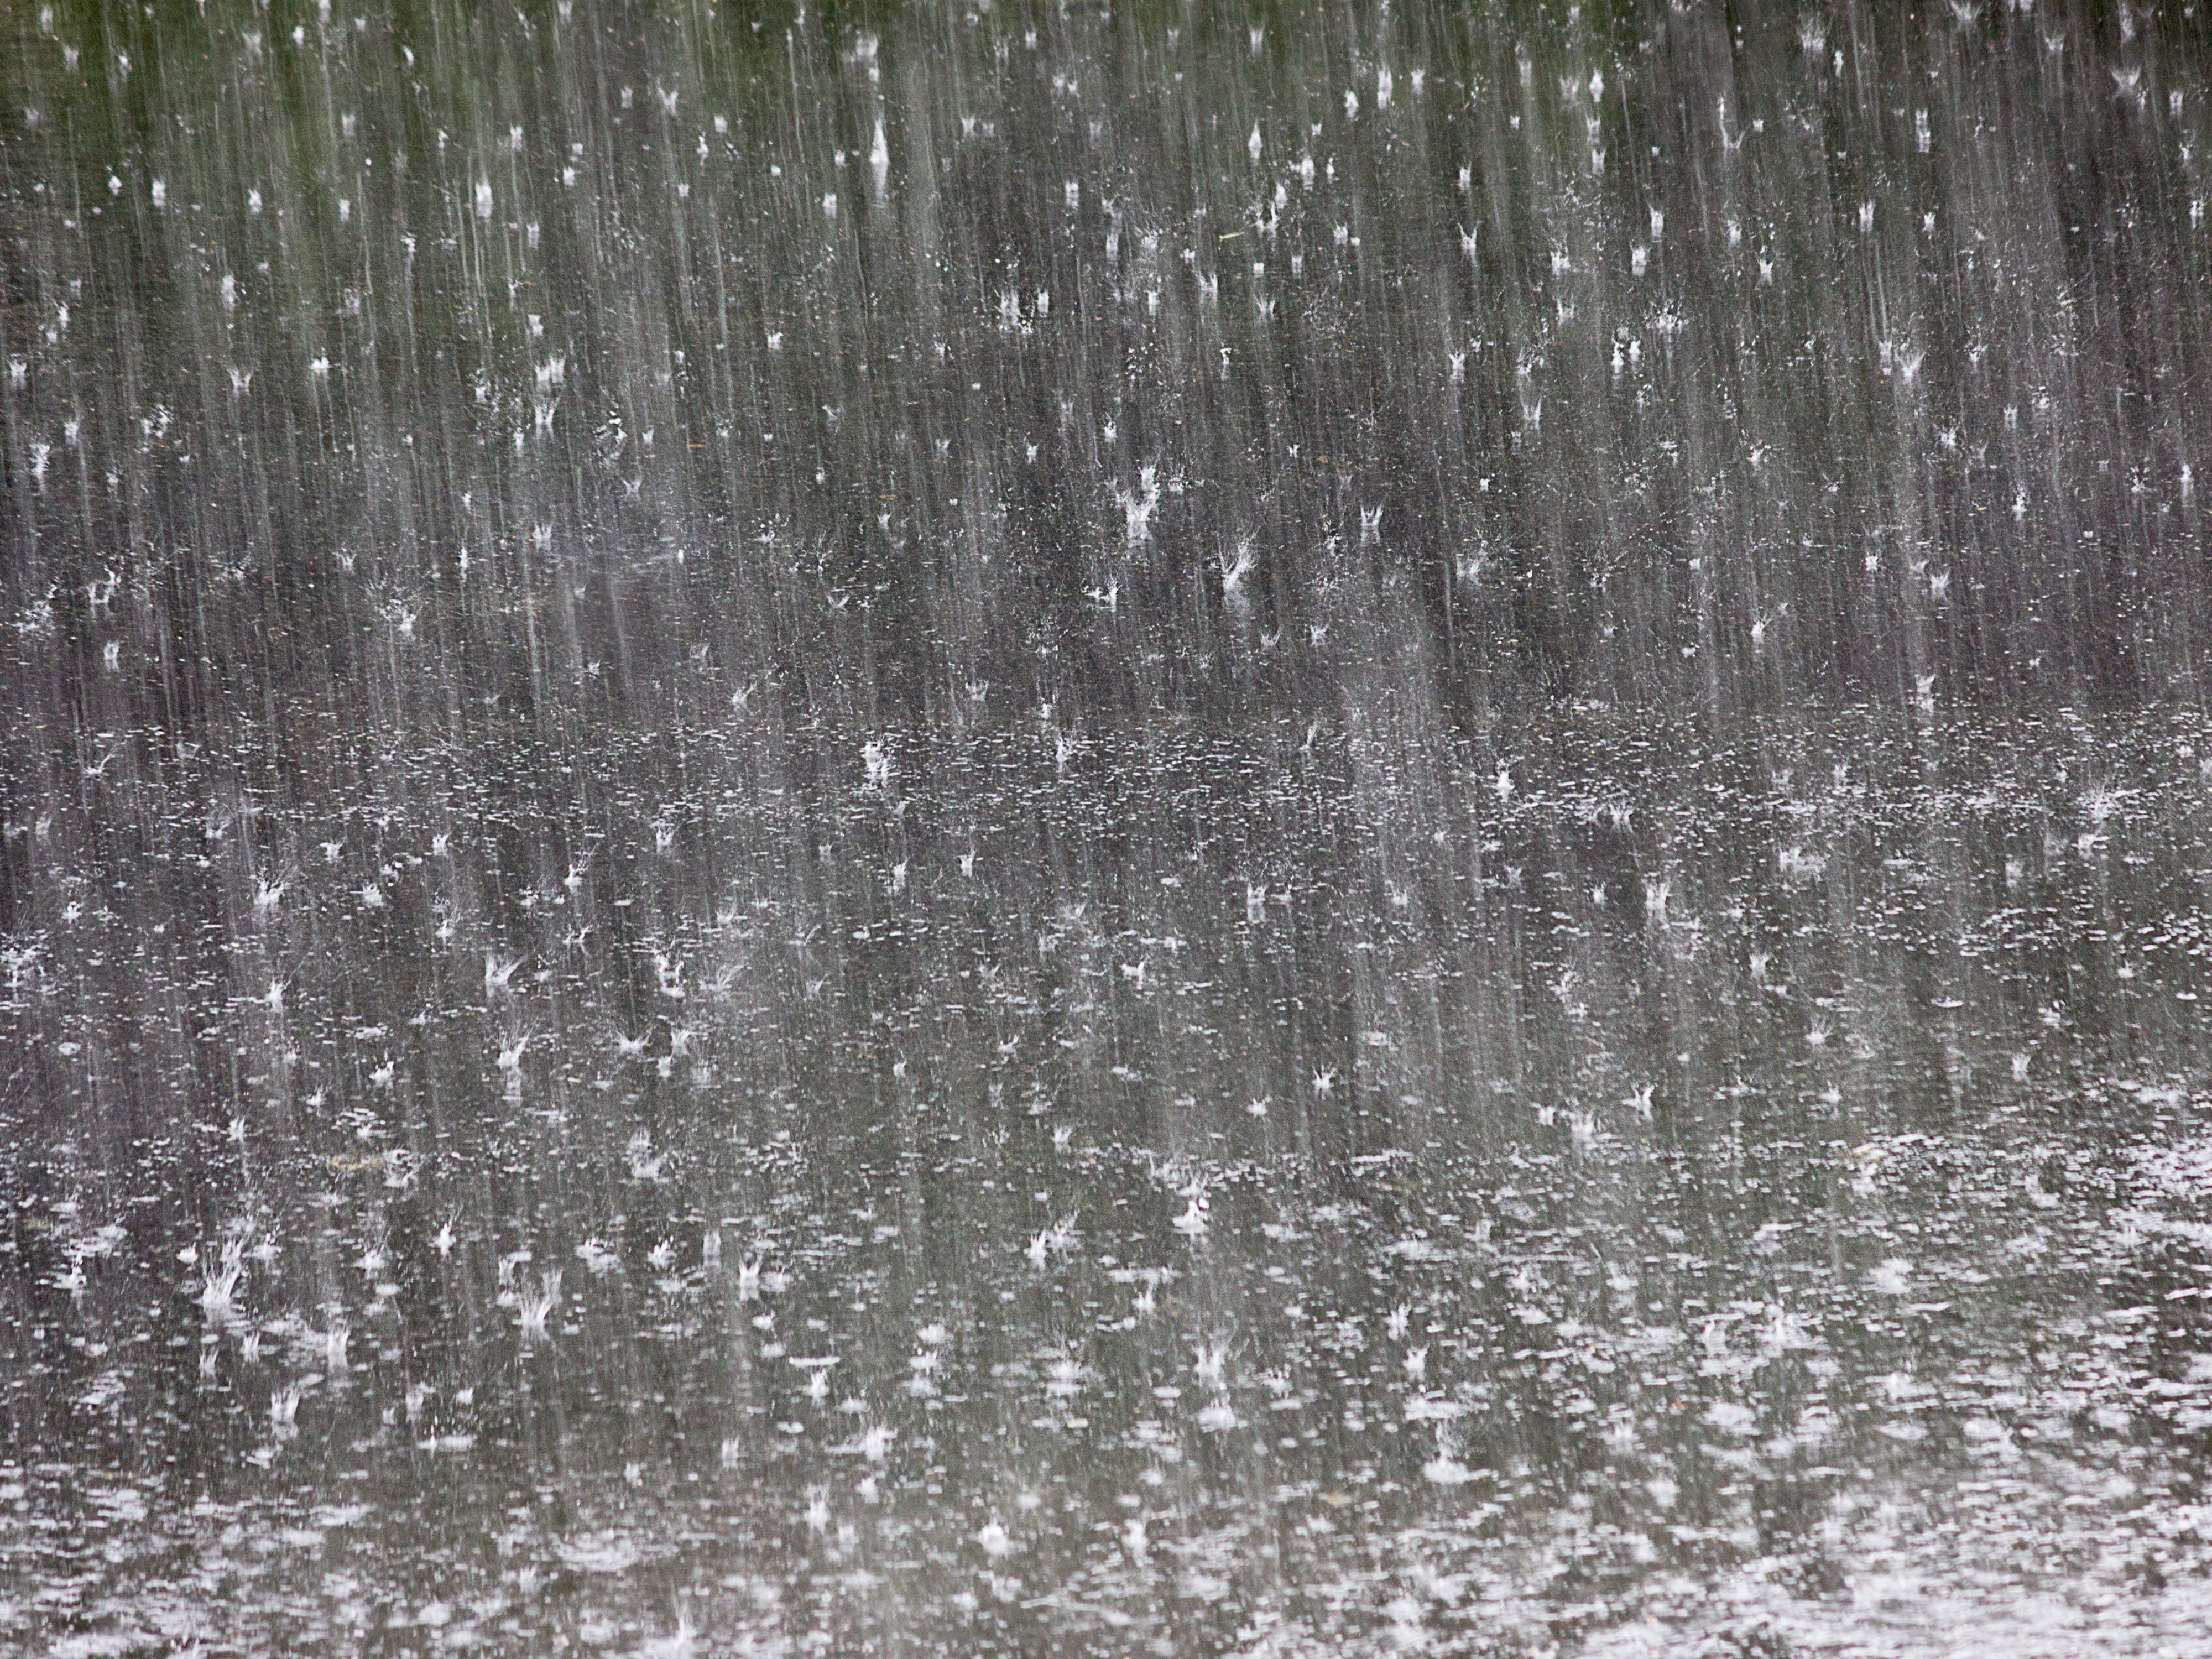 Heavy downpour expected in Chicago area today